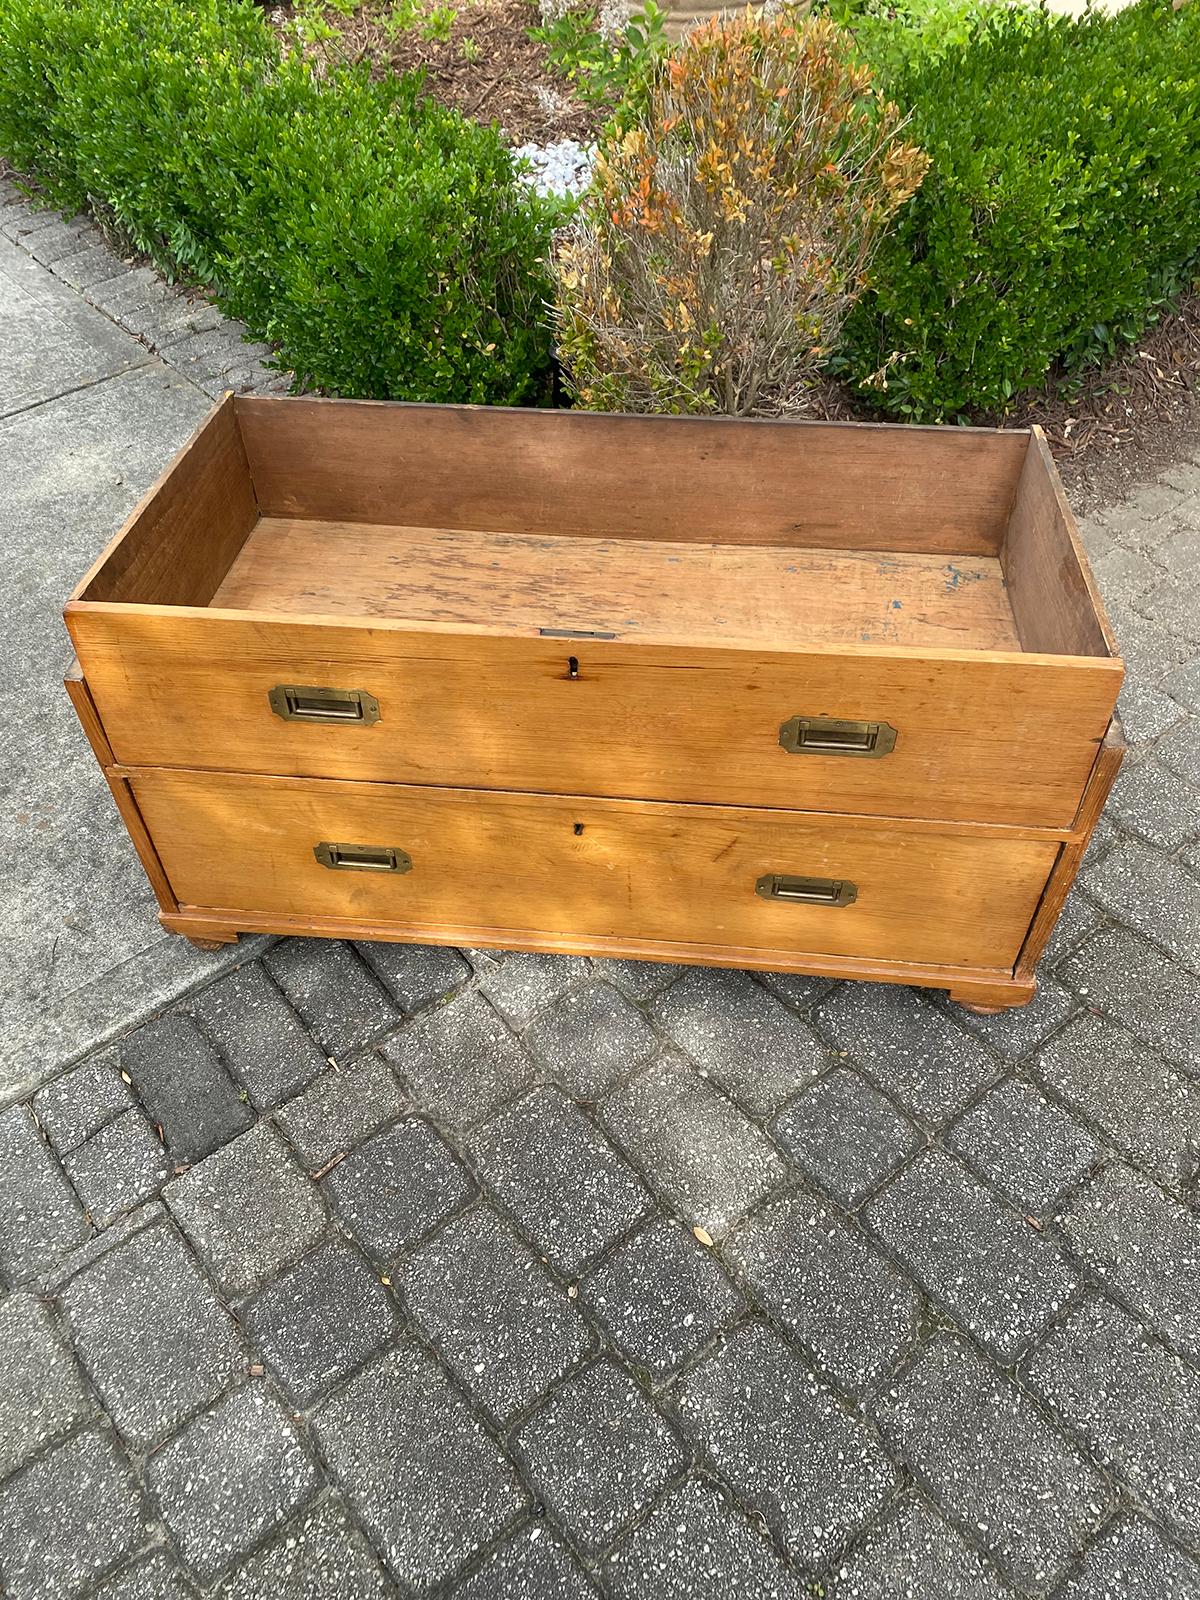 Circa 1880s-1890s English Pine Campaign Chest of Drawers For Sale 3